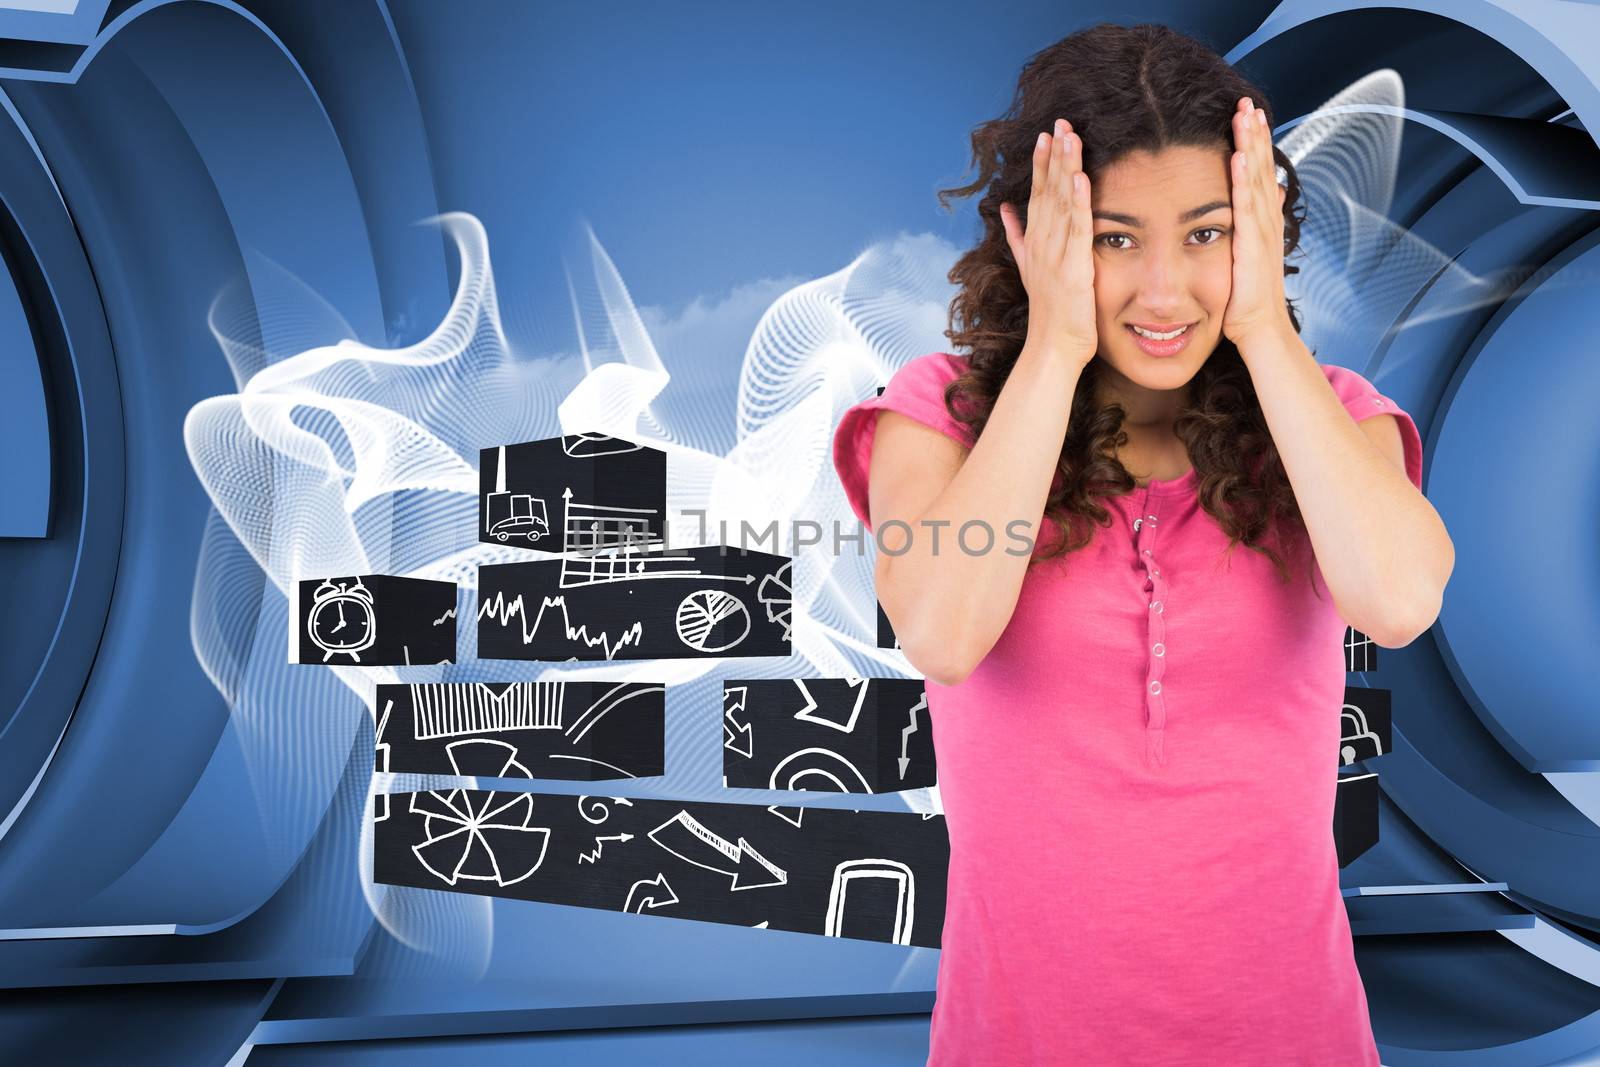 Cute brunette having headache against abstract linear design in blue and white